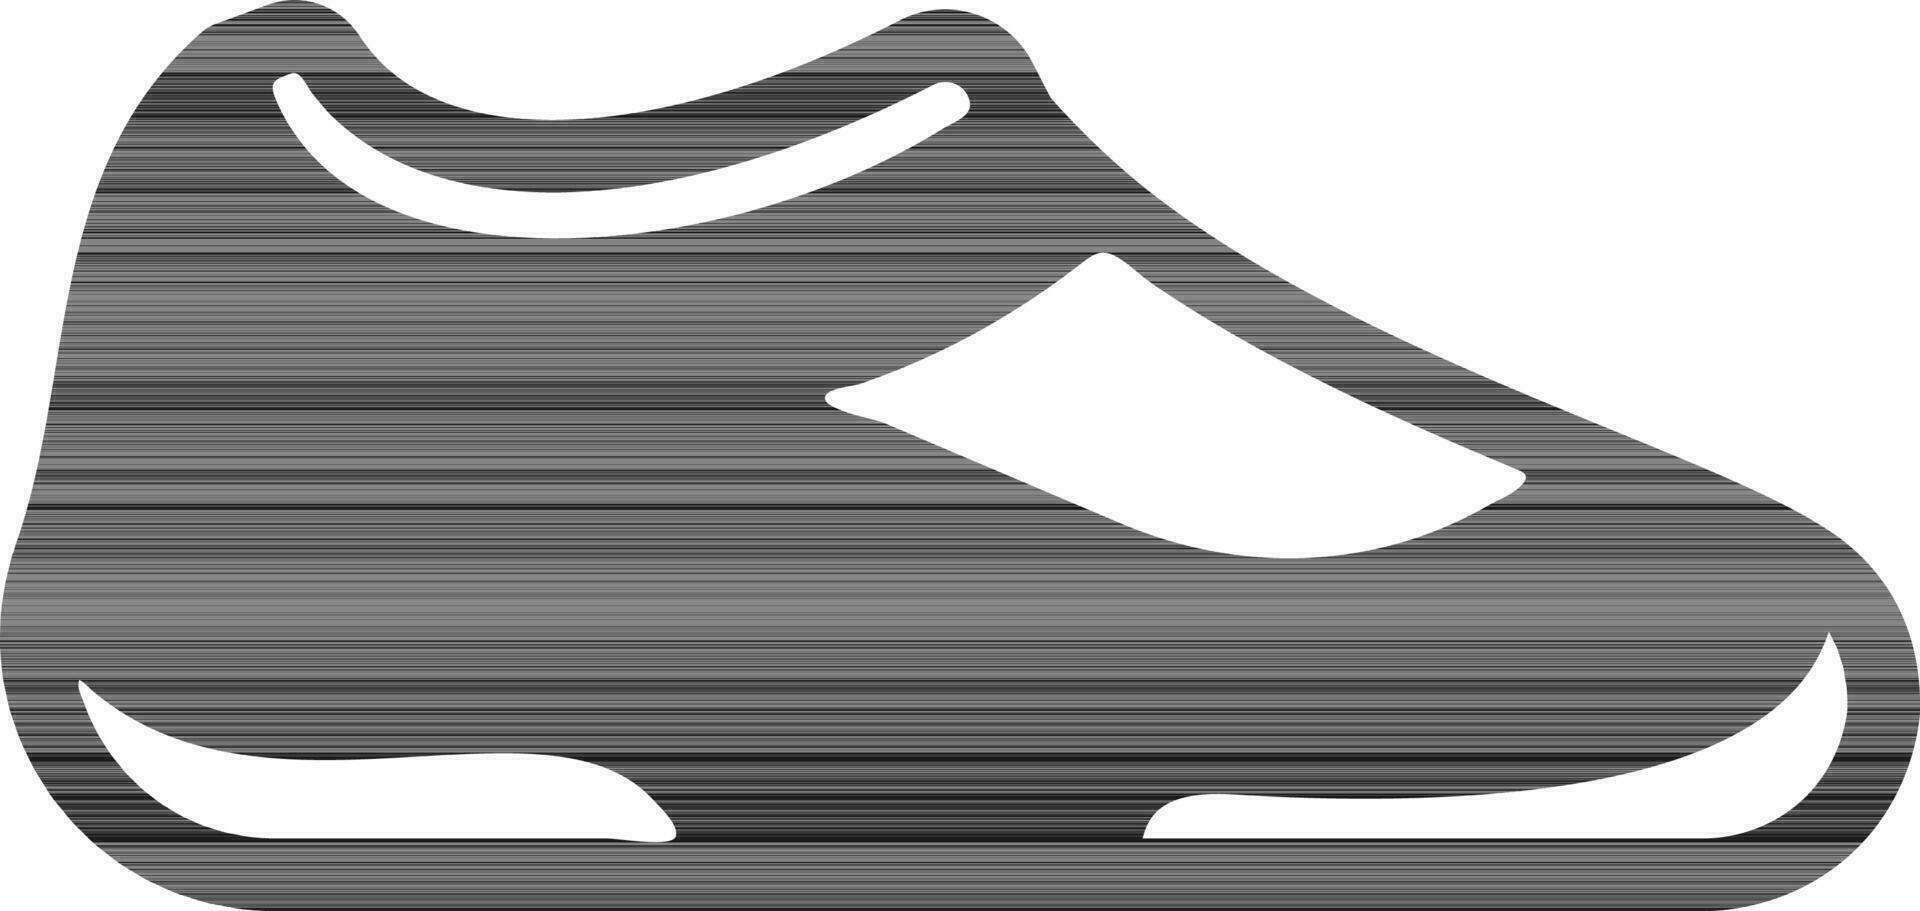 Black and White Shoes Icon in Flat Style. vector